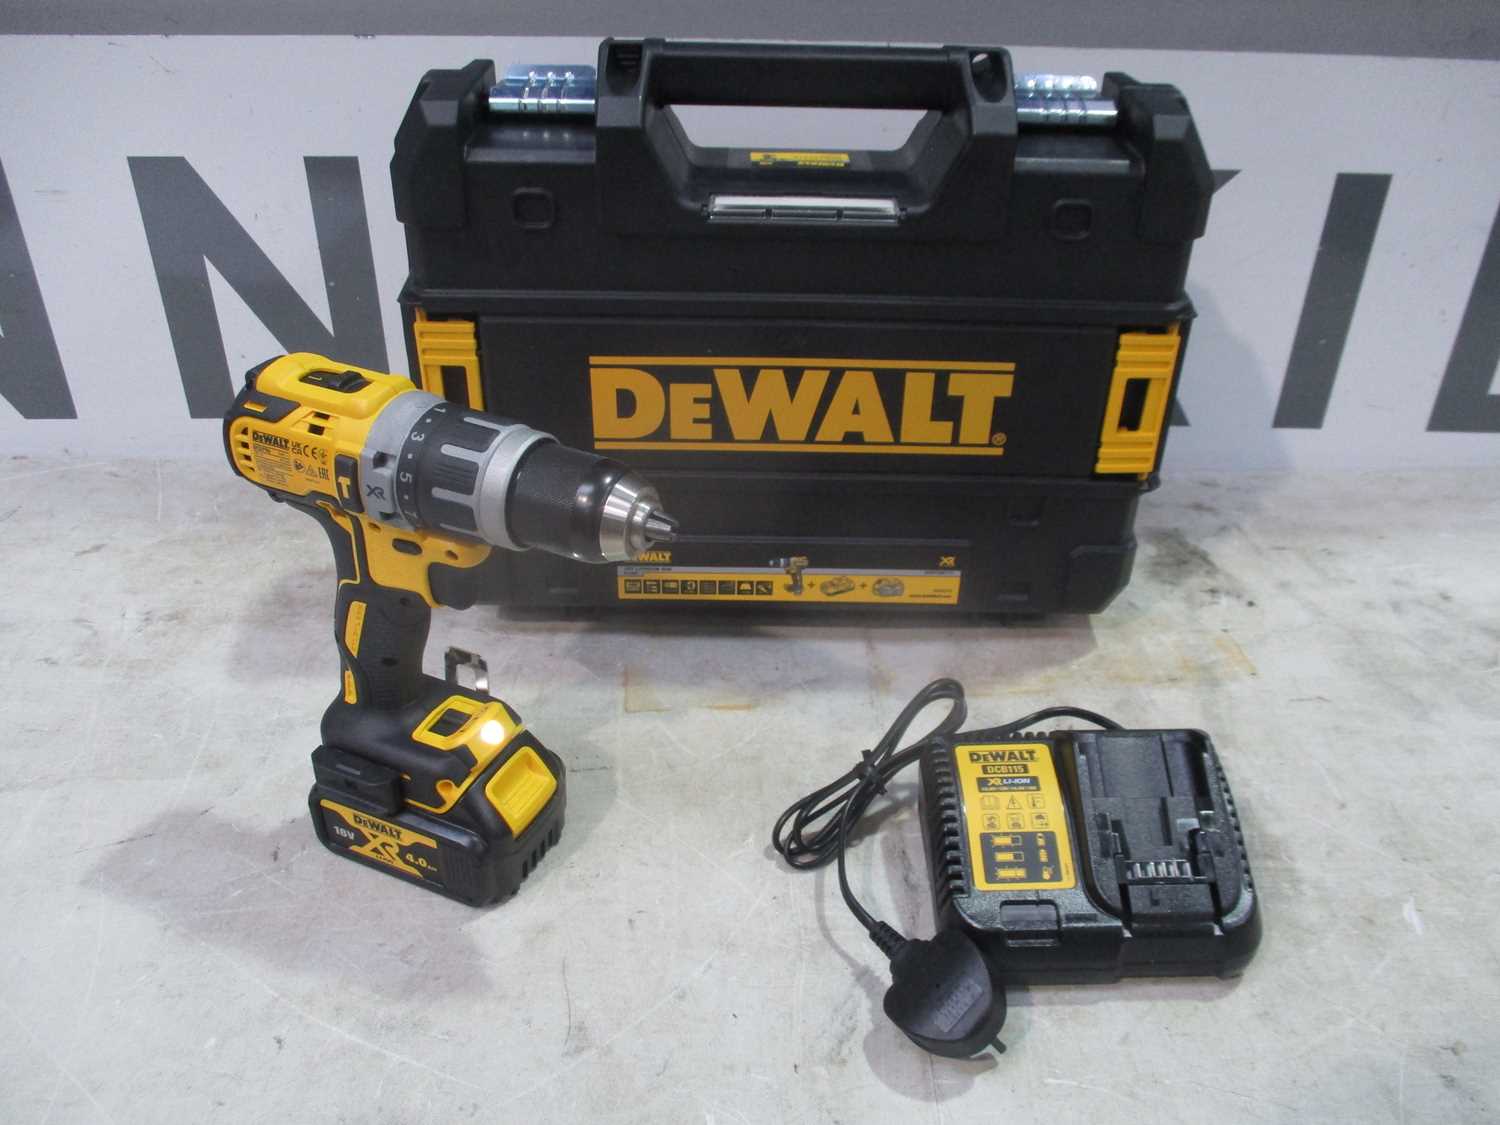 78 - DE WALT 18V CORDLESS DRILL WITH X1 4.0 BATTERY AND LI-ION CHARGER IN CARRY CASE